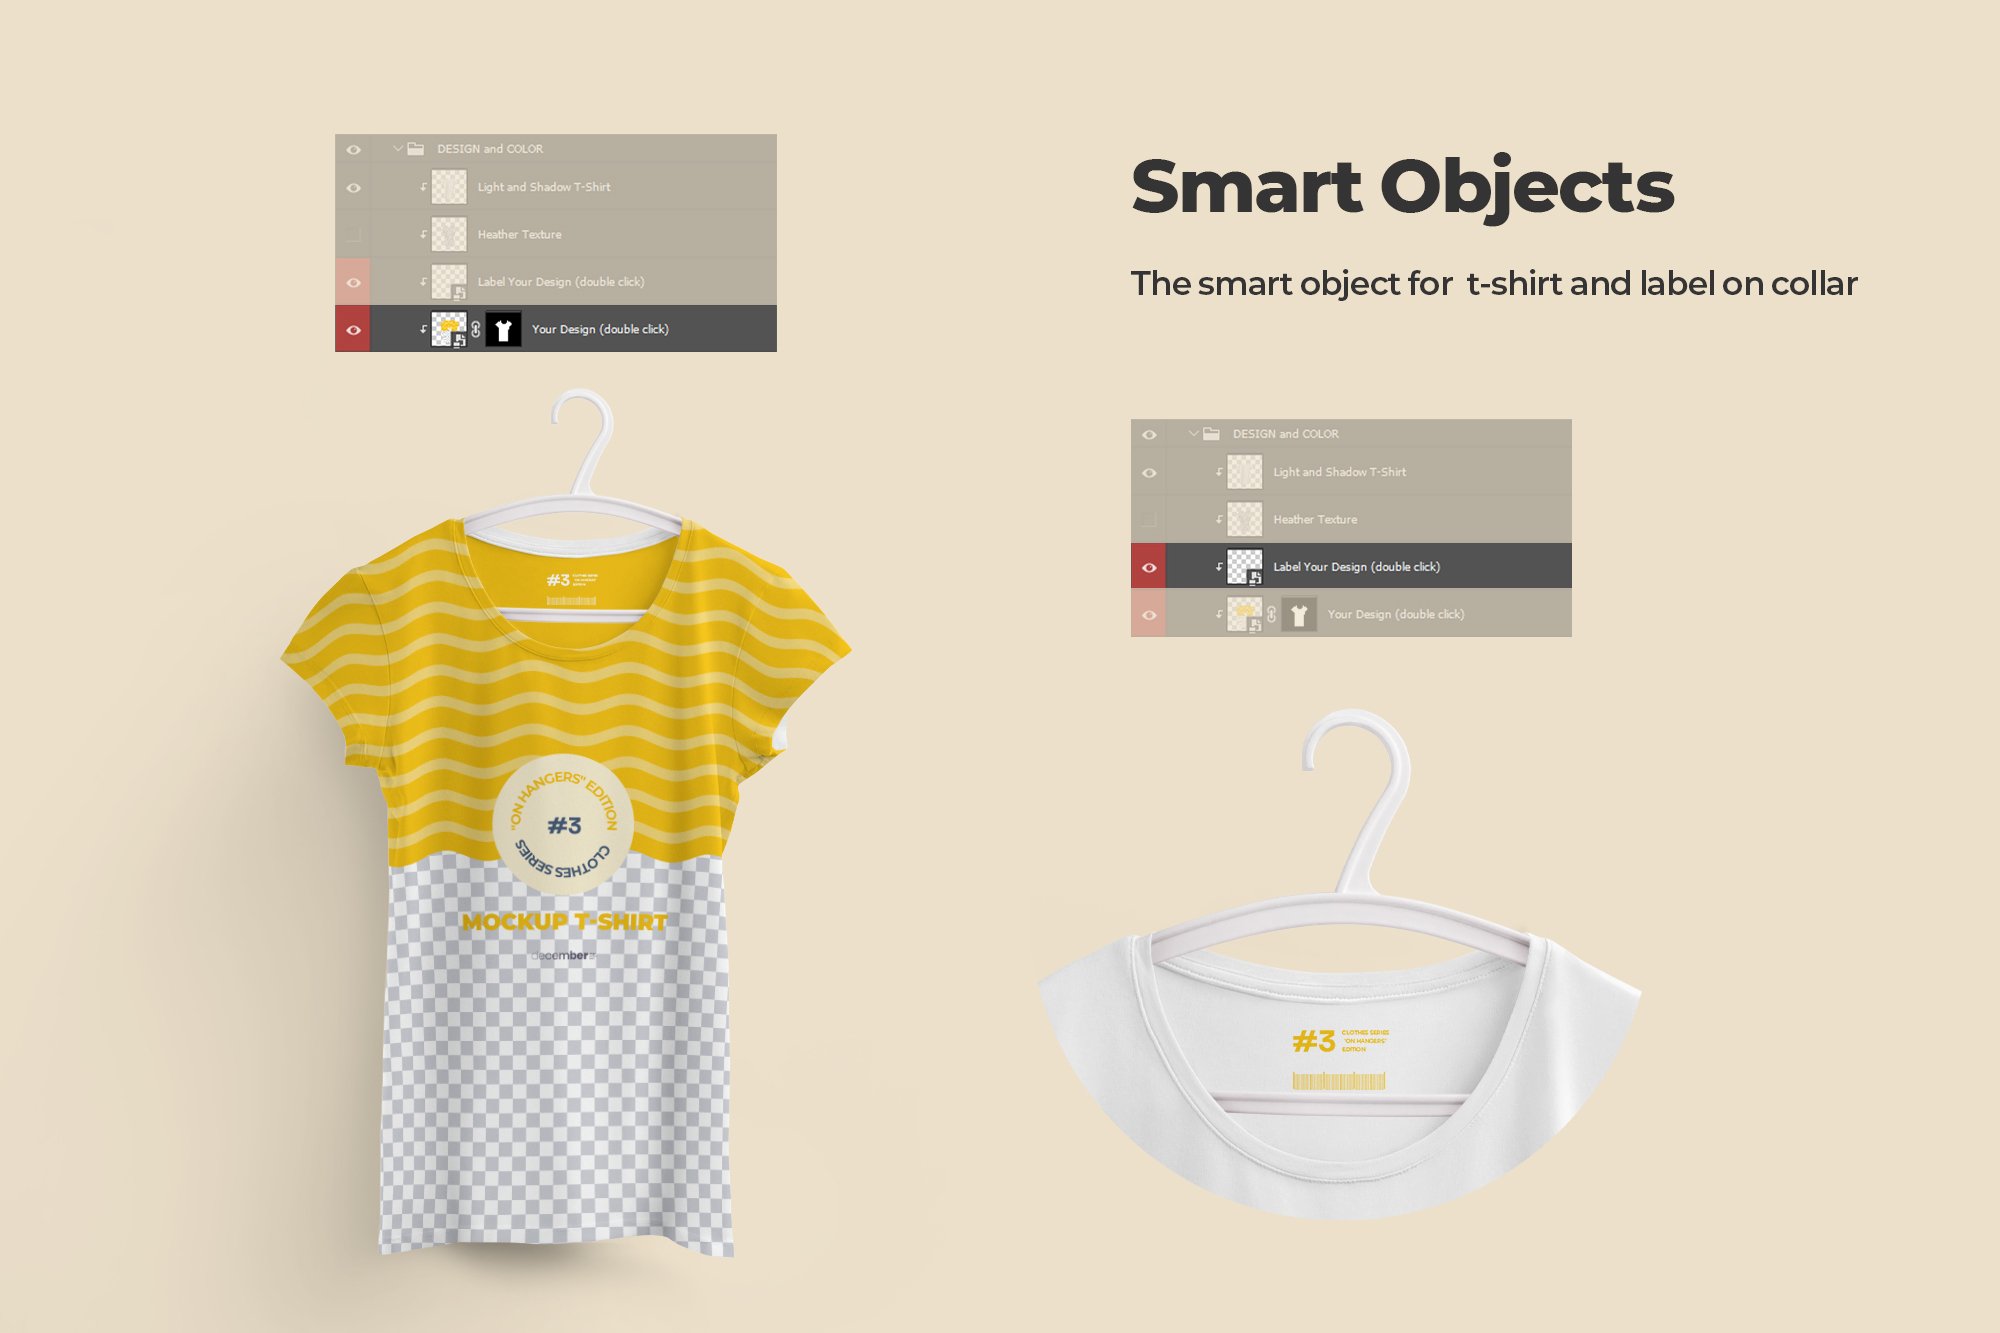 The smart objects for t-shirt and label on colar.